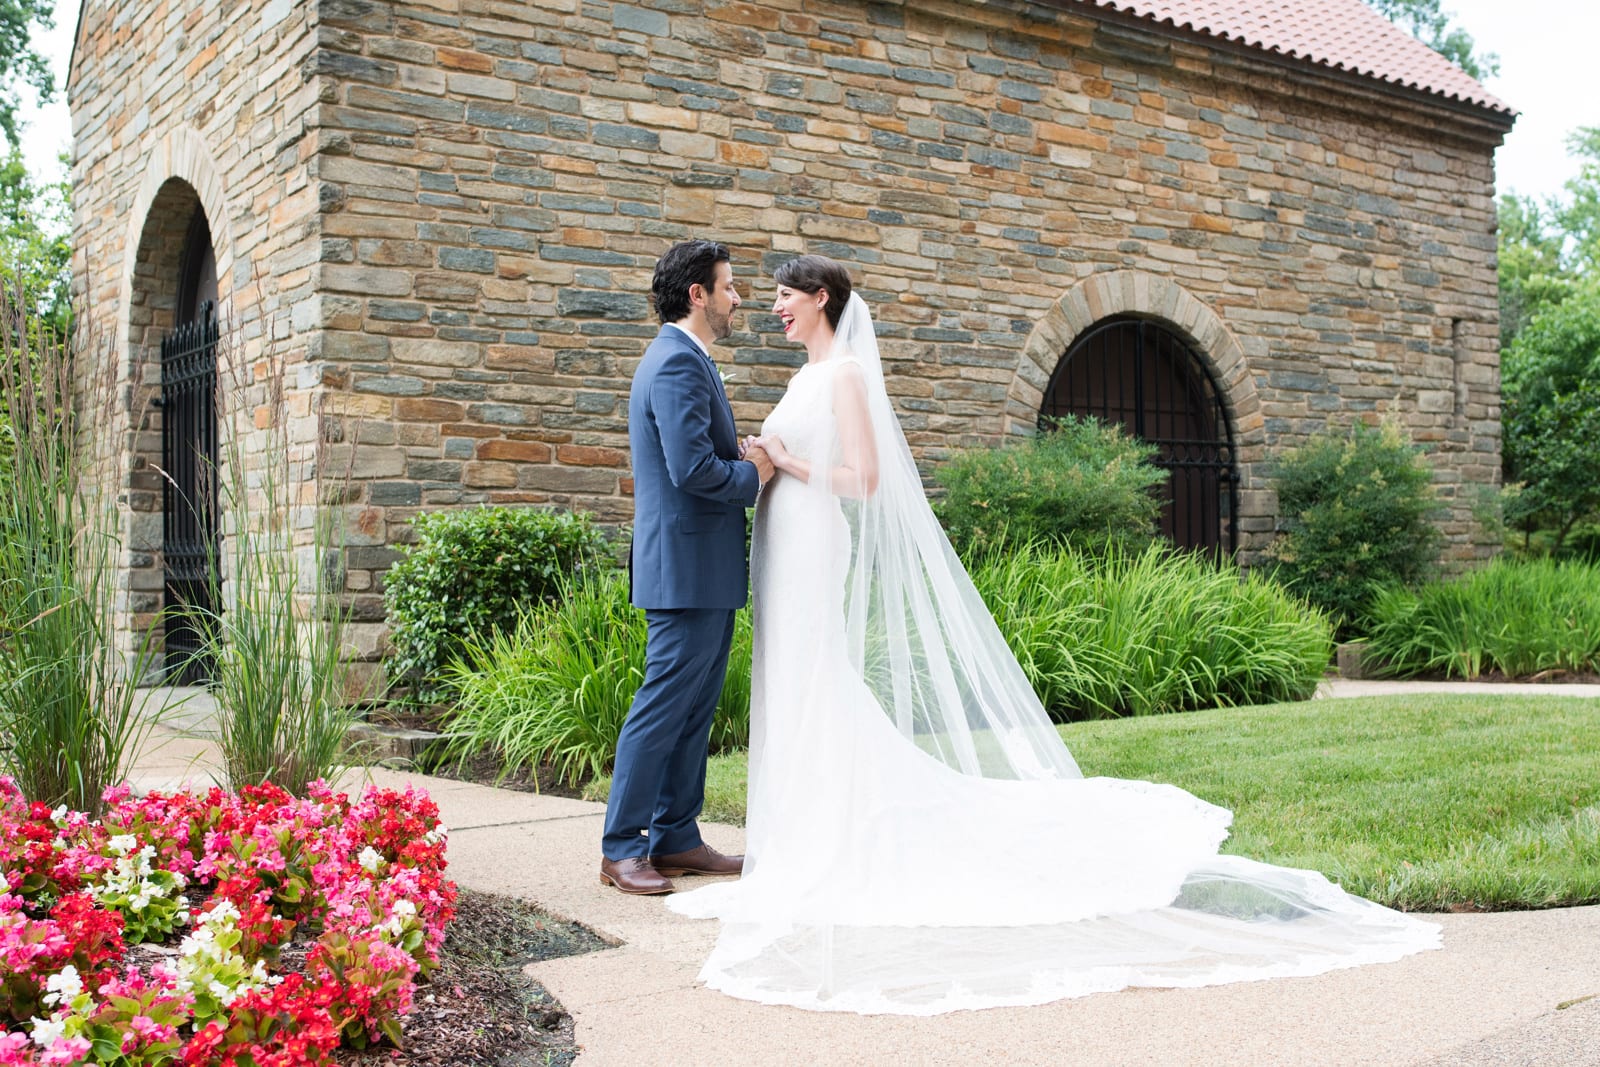 Red and pink flowers are in the foreground as a bride in a long, flowing white dress and a groom in a blue suit stand in front of a stone building with arched doorways and landscaped lawn during their St Francis Hall Washington DC wedding.